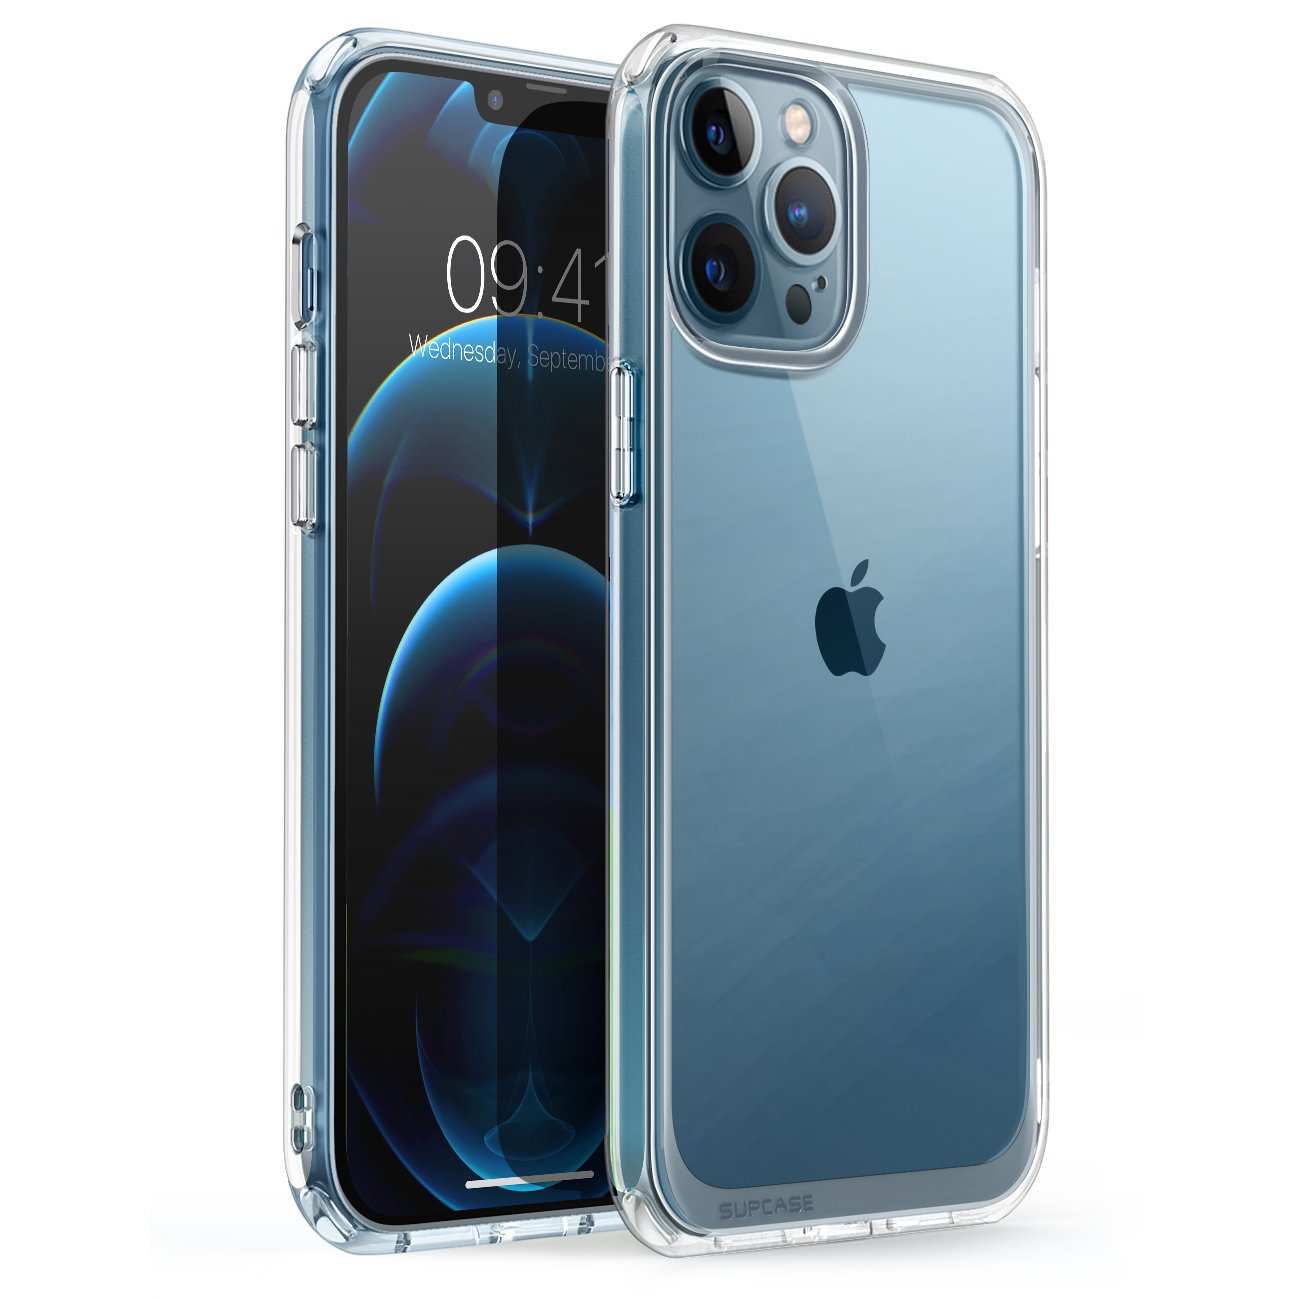 Supcase Unicorn Beetle Style Hybrid Protective Clear Case for iPhone 13 Pro Max (2021)